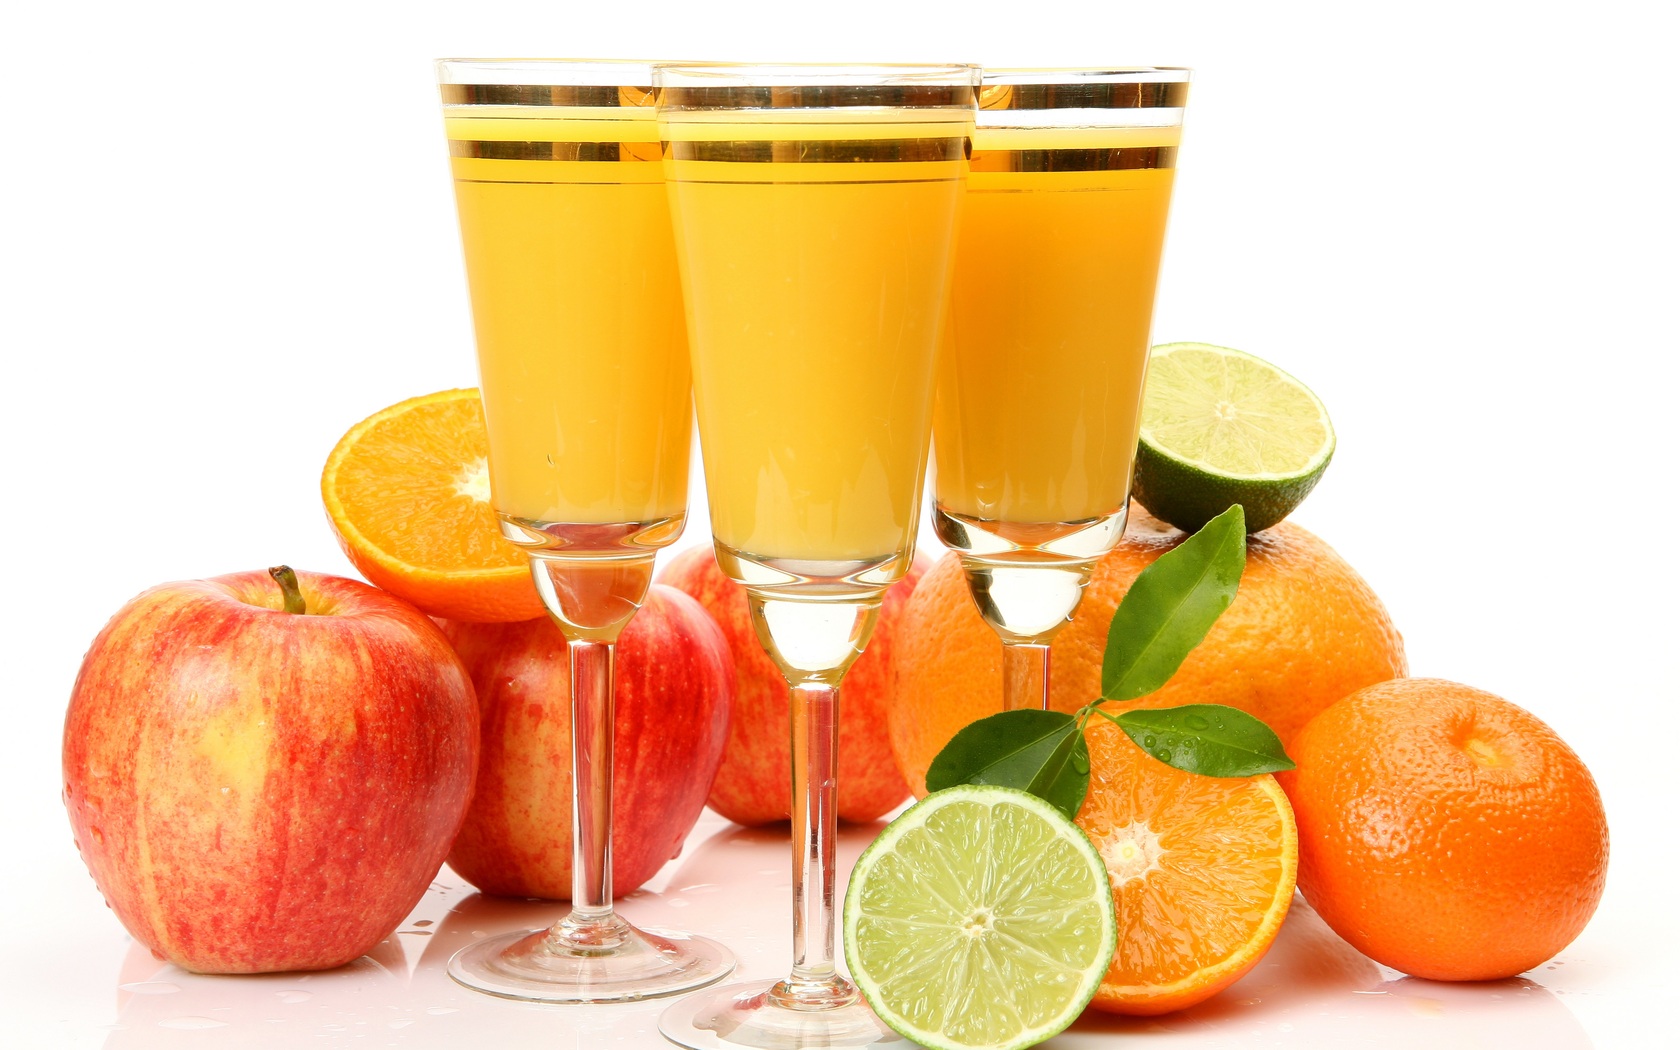 Fresh Juice HD Wallpapers Image source from this